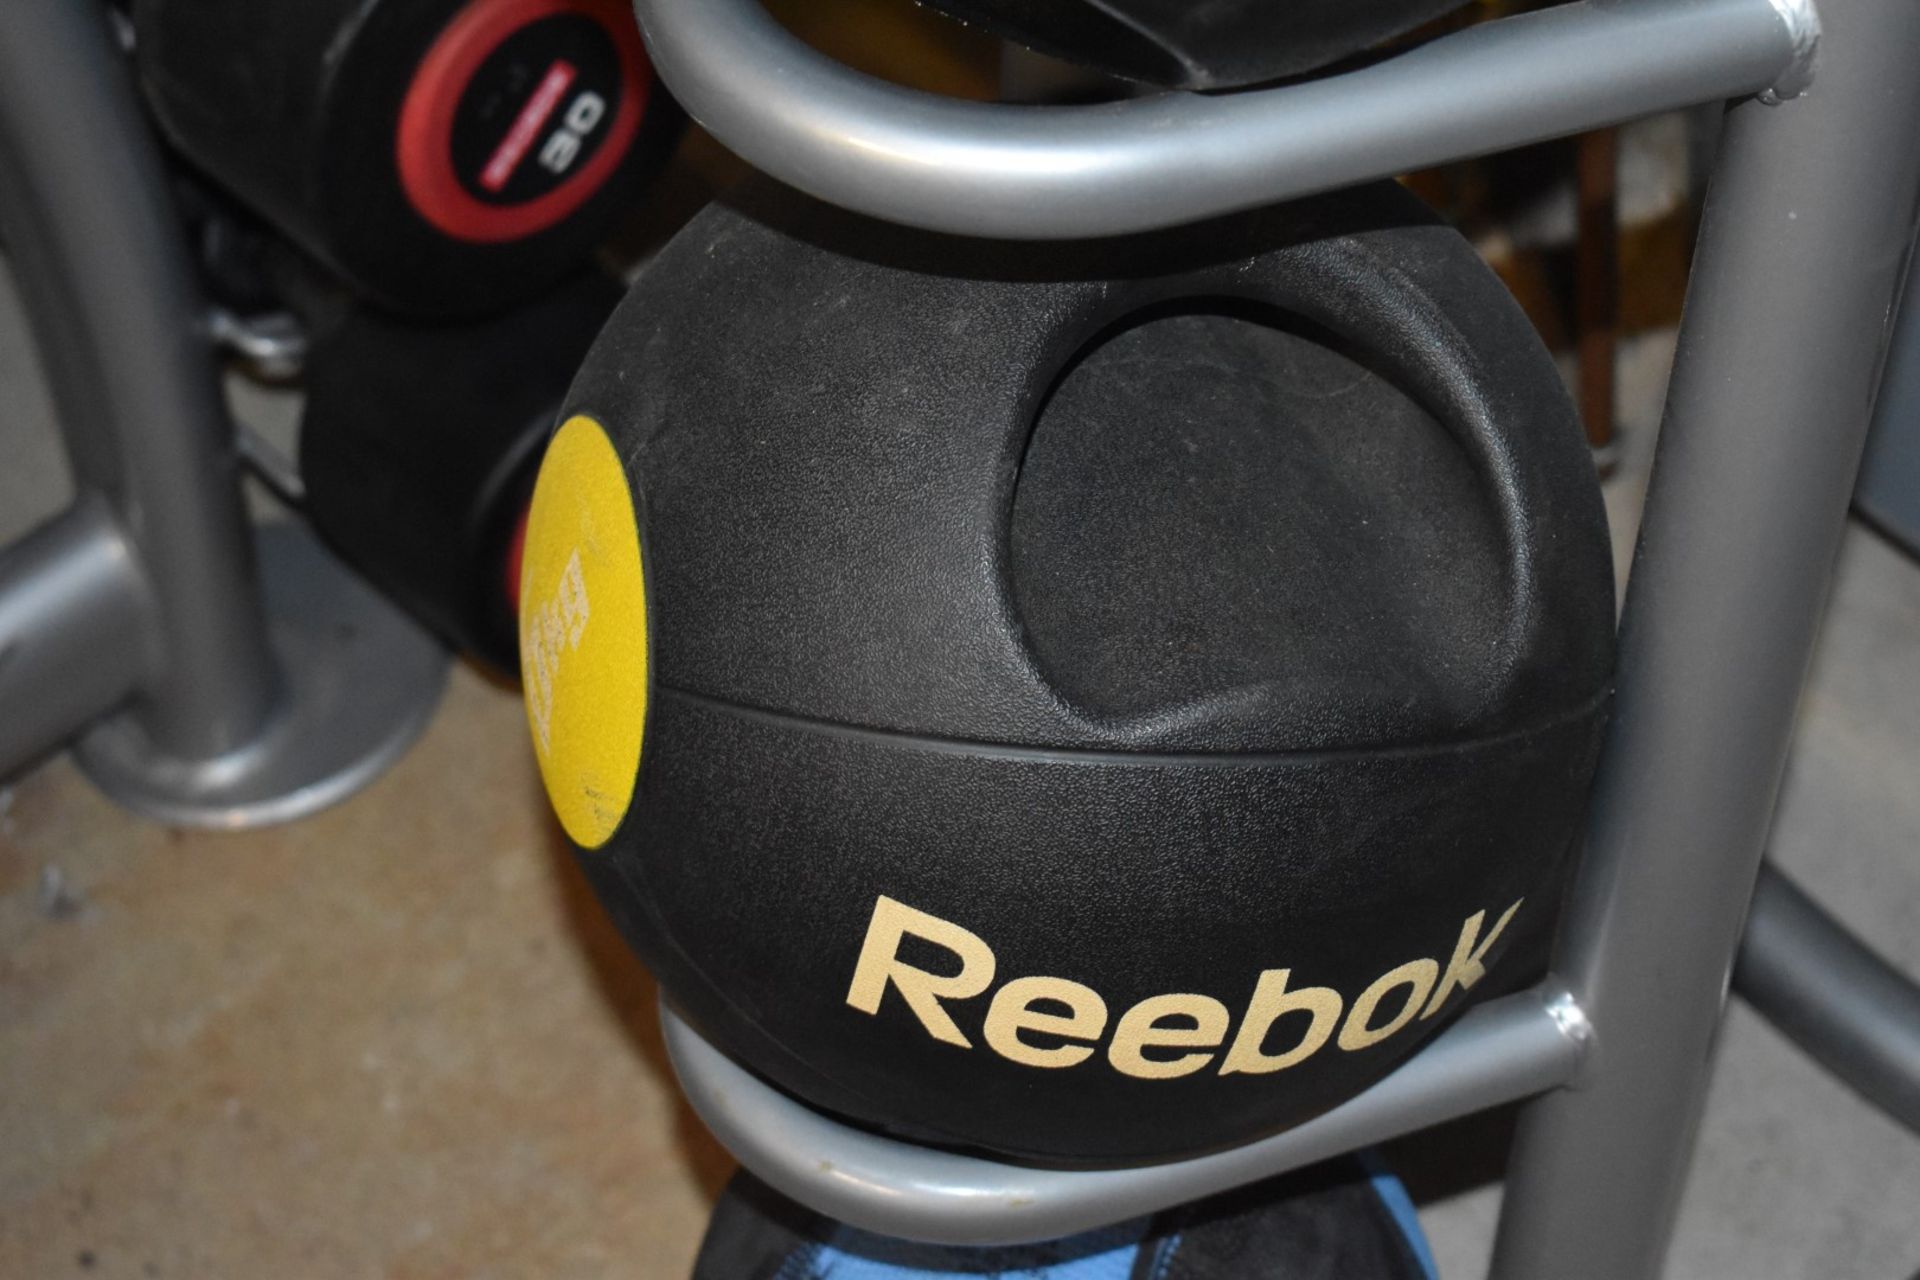 5 x Fitness Medicine Balls - Features Jordon Slam Ball and Reebok - Includes Ball Rack - CL546 - - Image 6 of 10